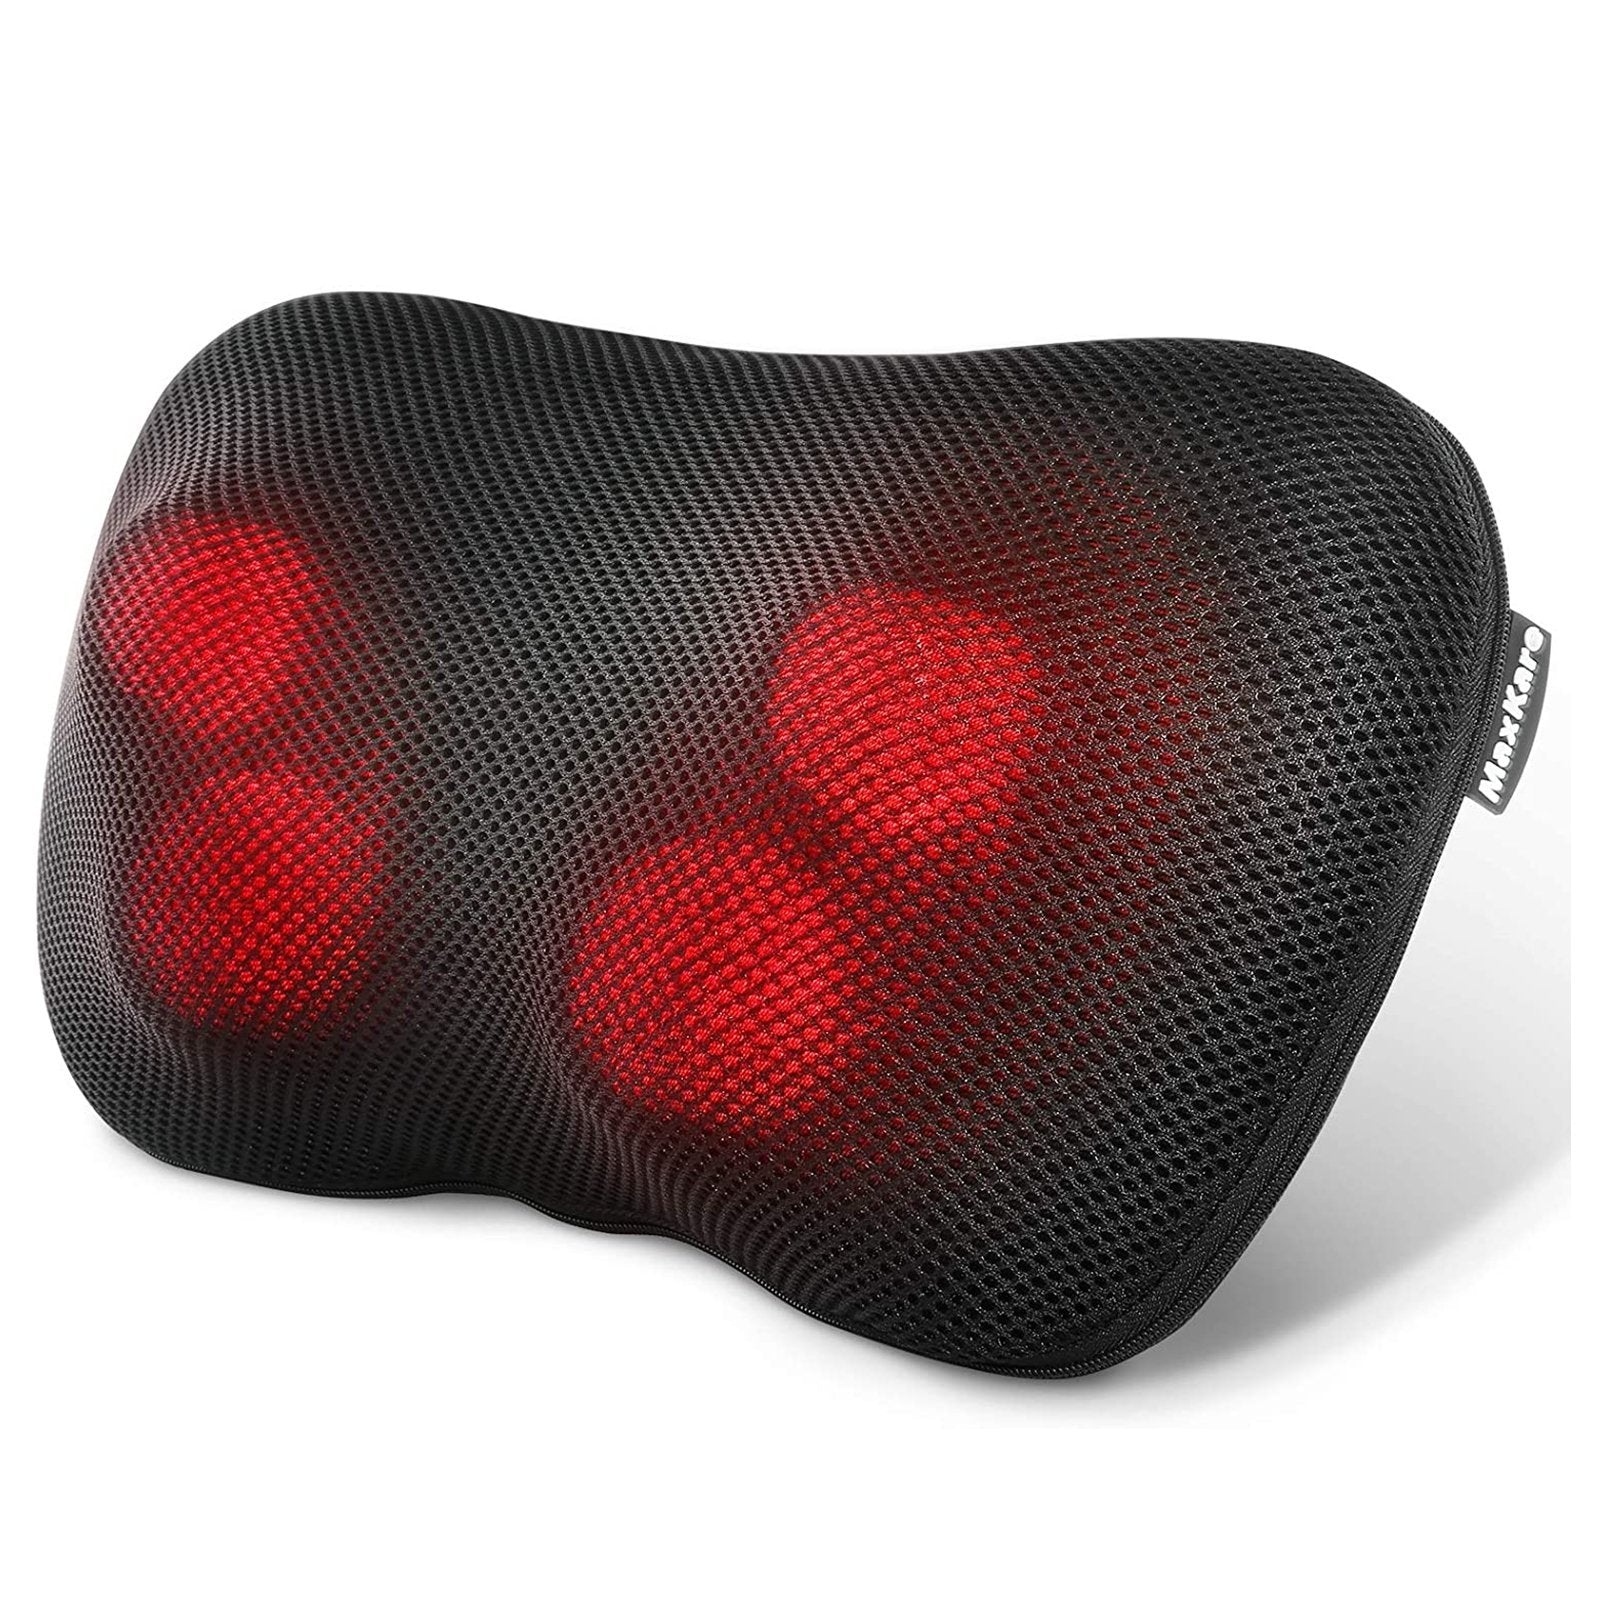 Load image into Gallery viewer, Maxkare Back Massager Neck Massager Massage Pillow With Heat, Shiatsu Kneading Massager for Shoulder, Waist, Use At Home Office - NAIPO
